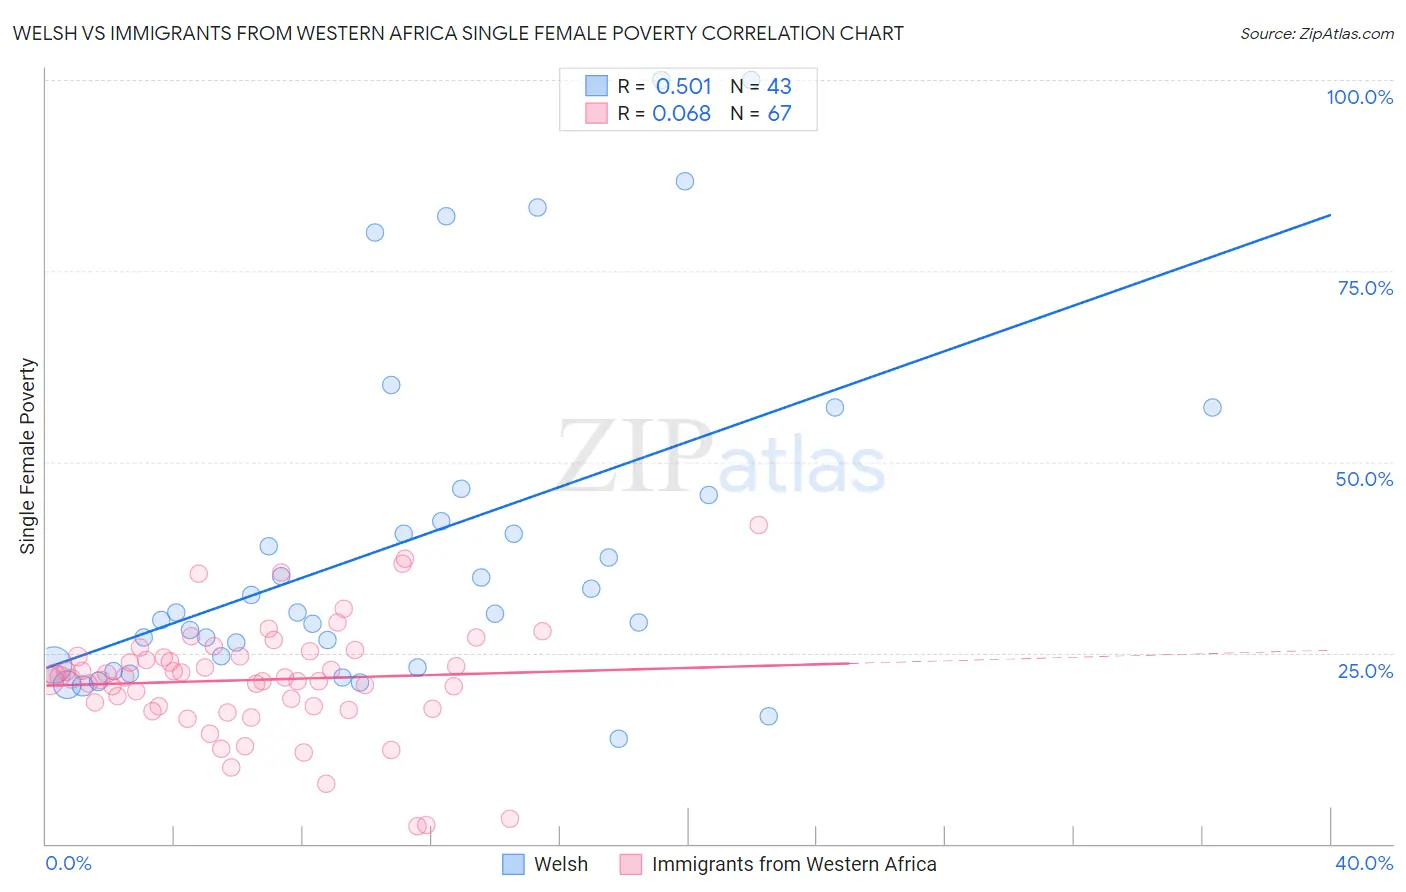 Welsh vs Immigrants from Western Africa Single Female Poverty